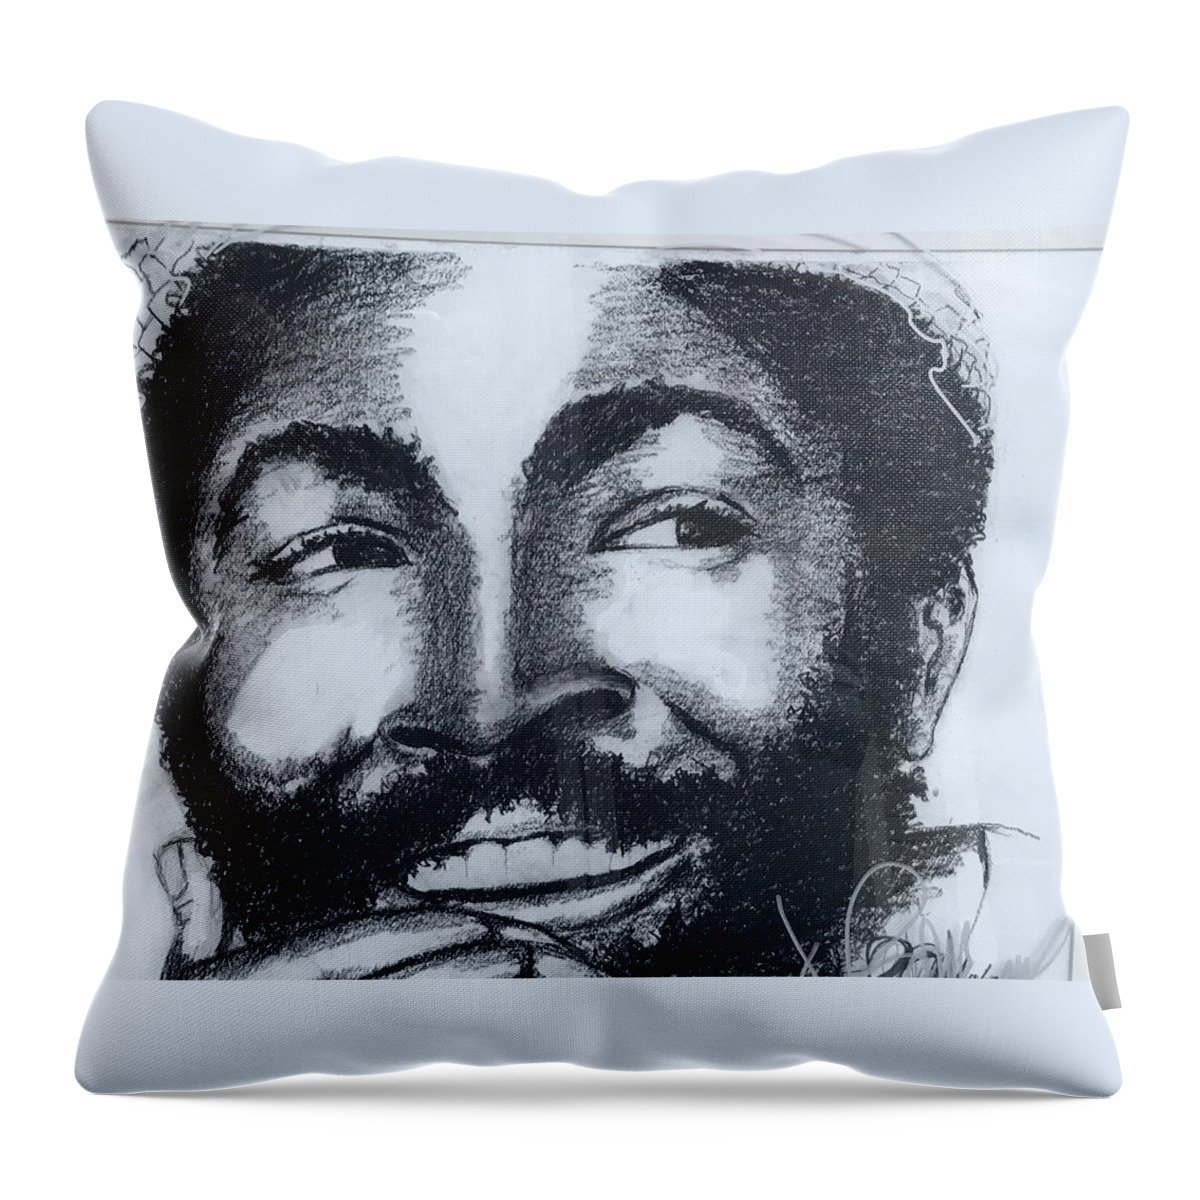  Throw Pillow featuring the drawing Smile by Angie ONeal